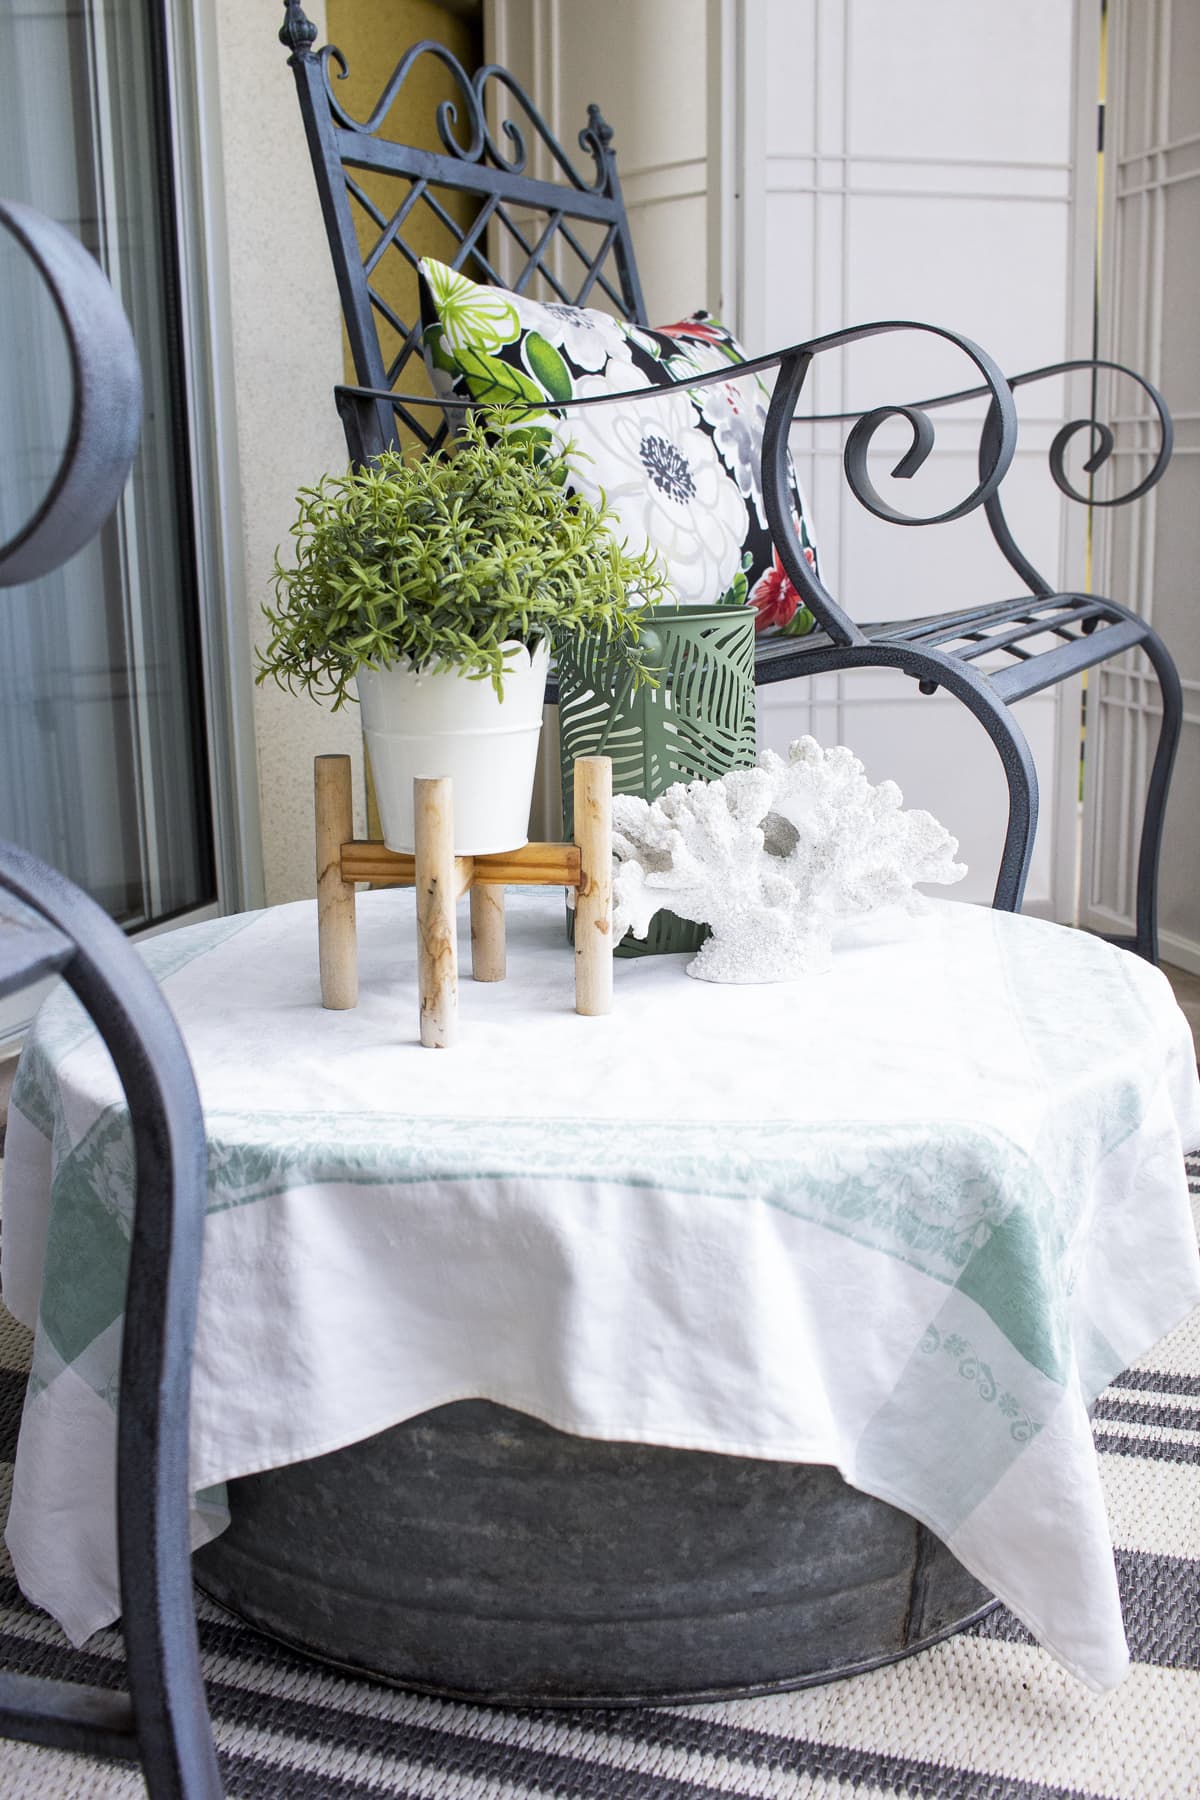 galvanized tub as table with linen table cloth and summer decor on balcony